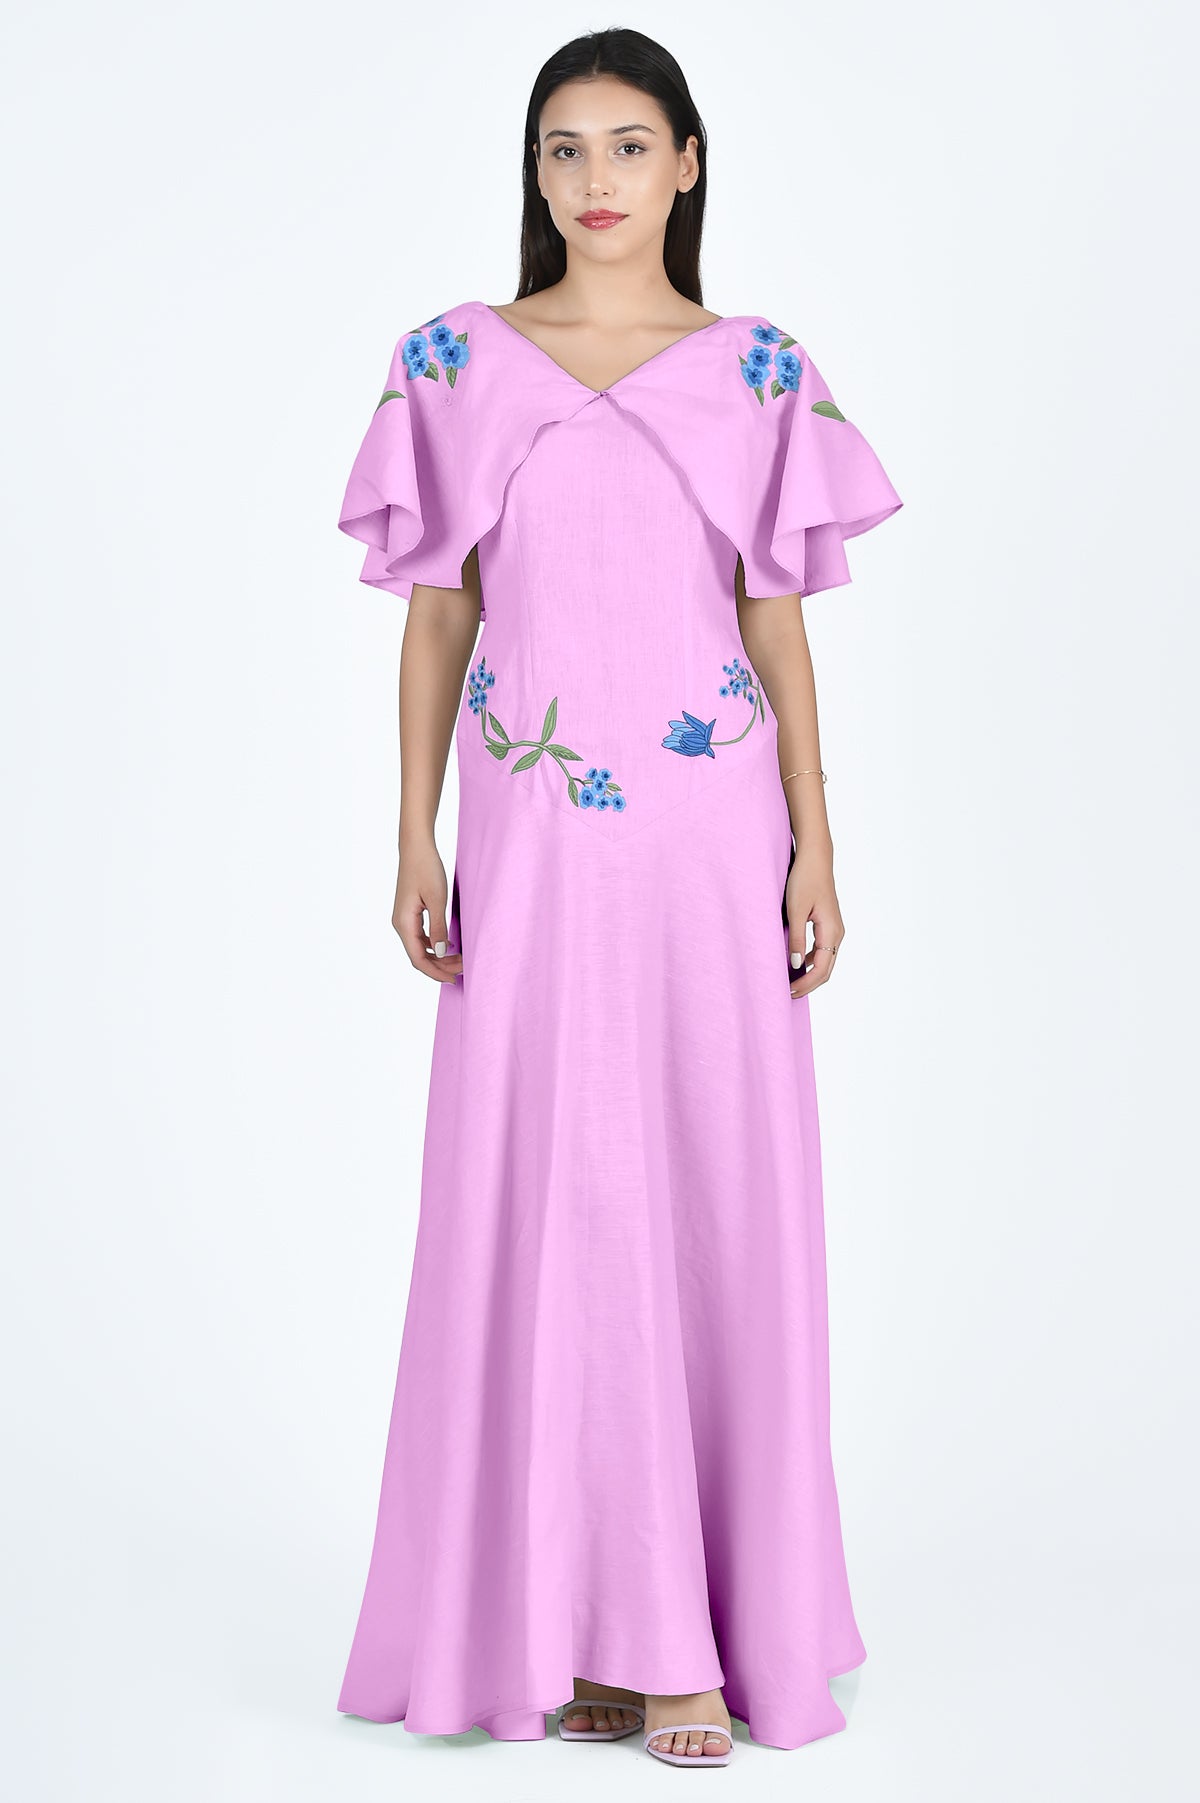 Fanm Mon Alexis Dress in Plum Pink with Floral Embroidery and Ruffle Sleeves (Wombman Collection)